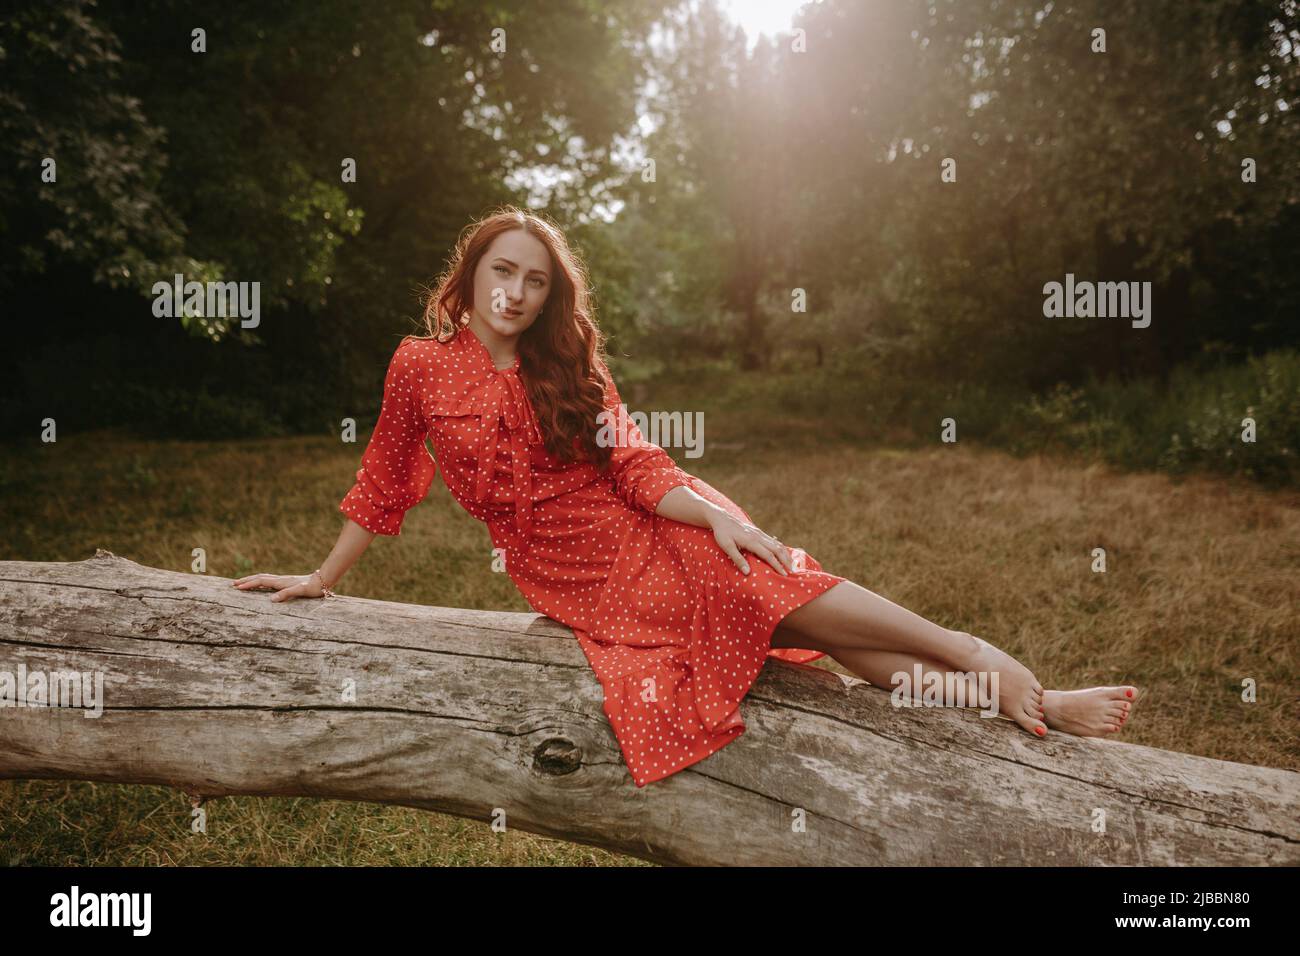 a young and beautiful woman in a red summer dress with white flecks lying on one side a fallen dry tree trunk in the middle of the forest Stock Photo